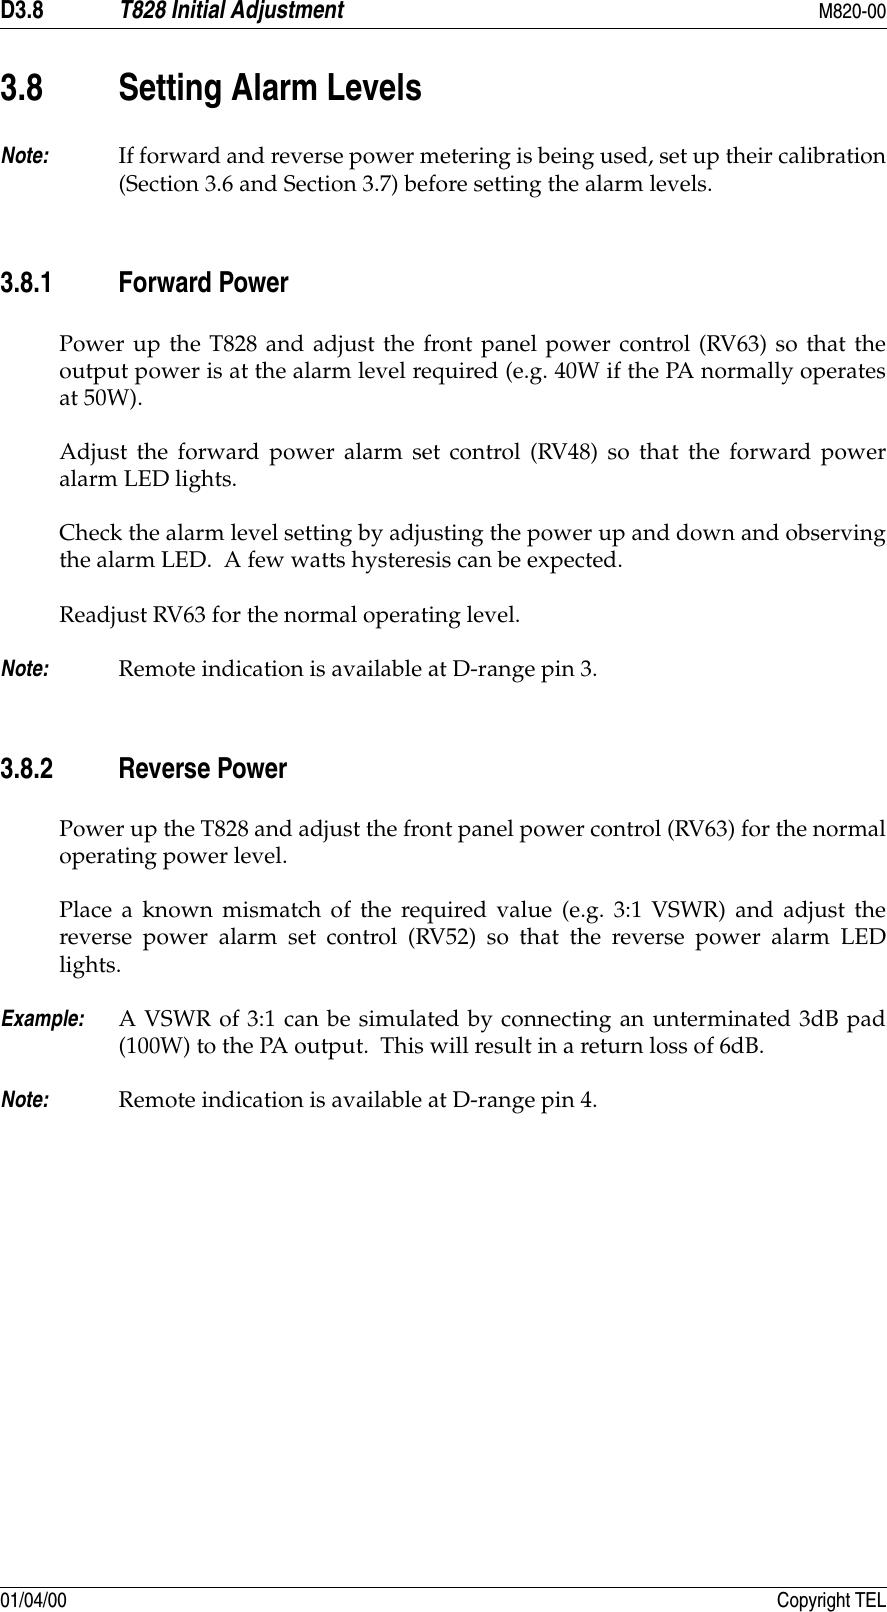 D3.8 T828 Initial Adjustment M820-0001/04/00 Copyright TEL3.8 Setting Alarm LevelsNote: If forward and reverse power metering is being used, set up their calibration(Section 3.6 and Section 3.7) before setting the alarm levels.3.8.1 Forward PowerPower up the T828 and adjust the front panel power control (RV63) so that theoutput power is at the alarm level required (e.g. 40W if the PA normally operatesat 50W).Adjust the forward power alarm set control (RV48) so that the forward poweralarm LED lights.Check the alarm level setting by adjusting the power up and down and observingthe alarm LED.  A few watts hysteresis can be expected.Readjust RV63 for the normal operating level.Note: Remote indication is available at D-range pin 3.3.8.2 Reverse PowerPower up the T828 and adjust the front panel power control (RV63) for the normaloperating power level.Place a known mismatch of the required value (e.g. 3:1 VSWR) and adjust thereverse power alarm set control (RV52) so that the reverse power alarm LEDlights.Example: A VSWR of 3:1 can be simulated by connecting an unterminated 3dB pad(100W) to the PA output.  This will result in a return loss of 6dB.Note: Remote indication is available at D-range pin 4.